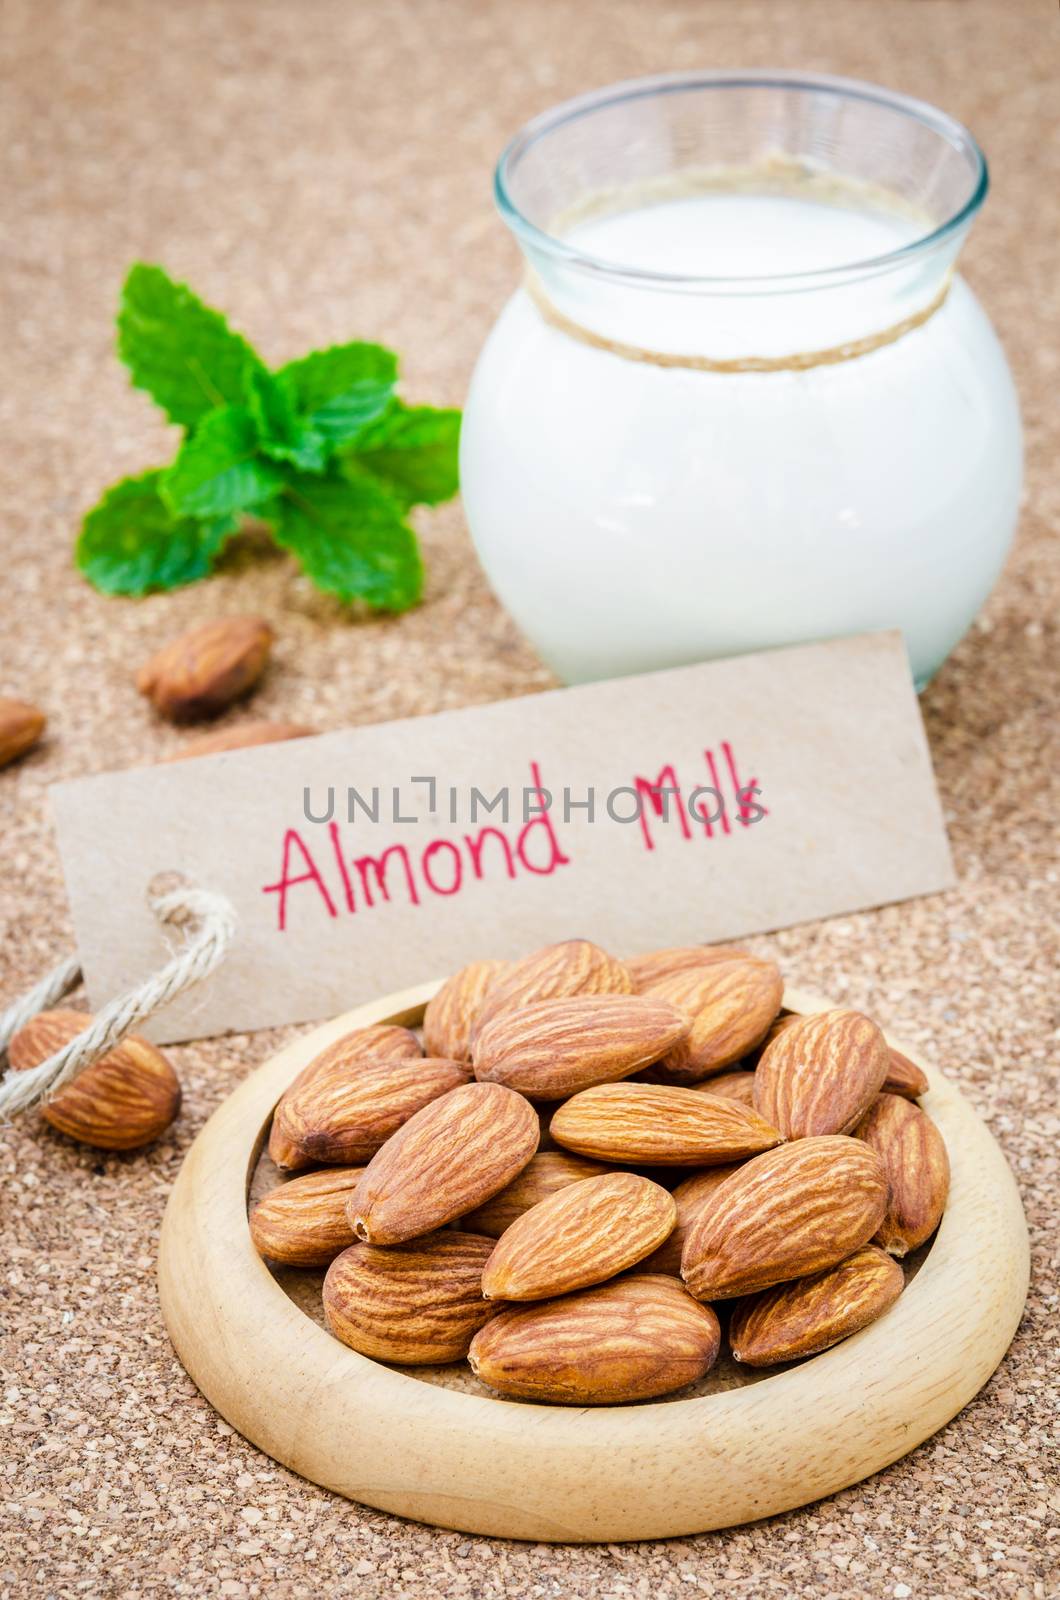 Almond and almond milk on wooden table.